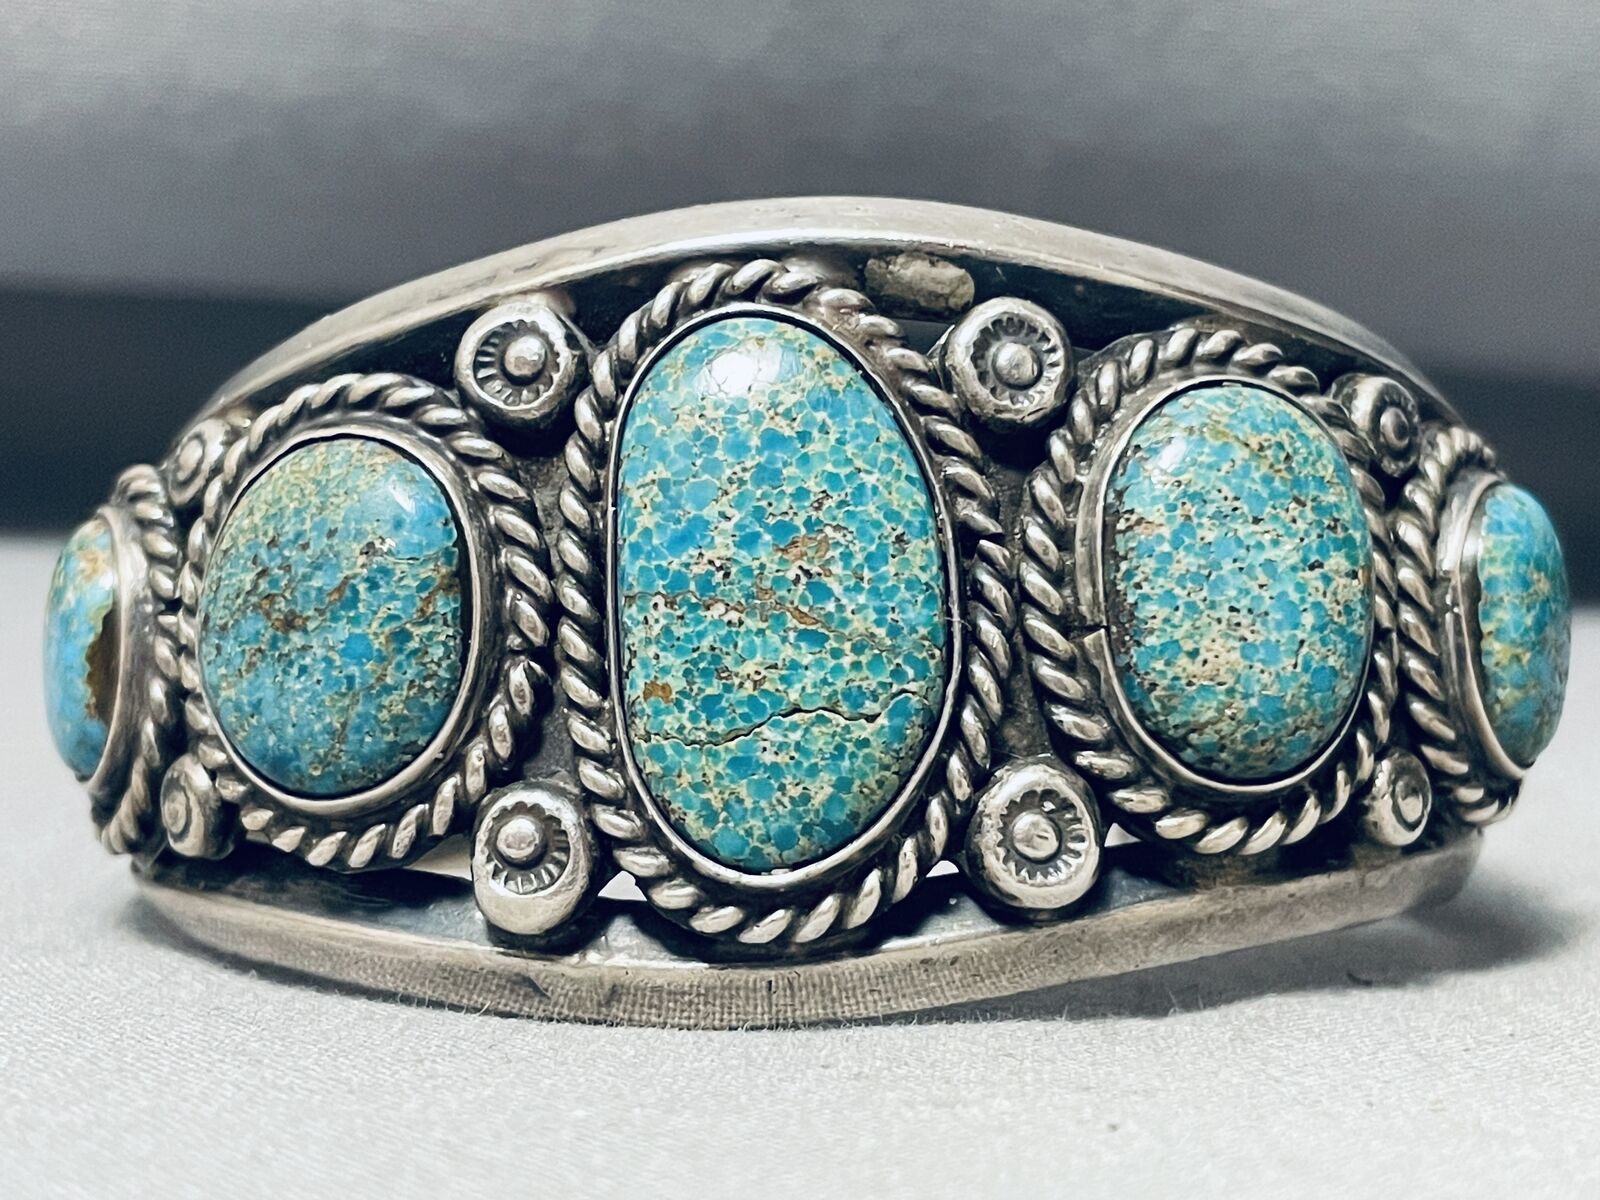 ONE OF THE FINEST RARE TURQUOISE MINE STERLING SILVER BRACELET